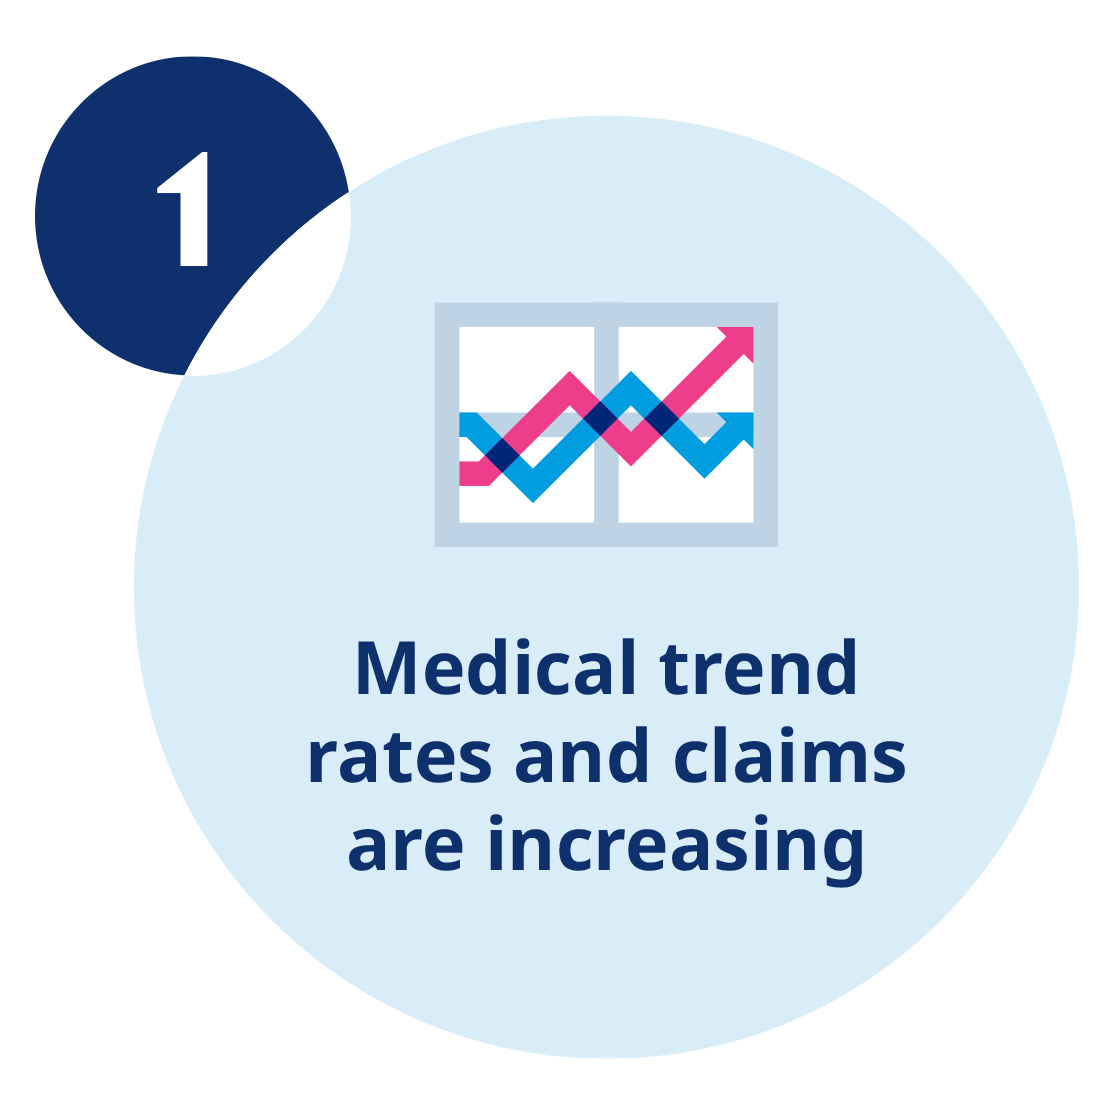 1. Medical trend rates and claims are increasing